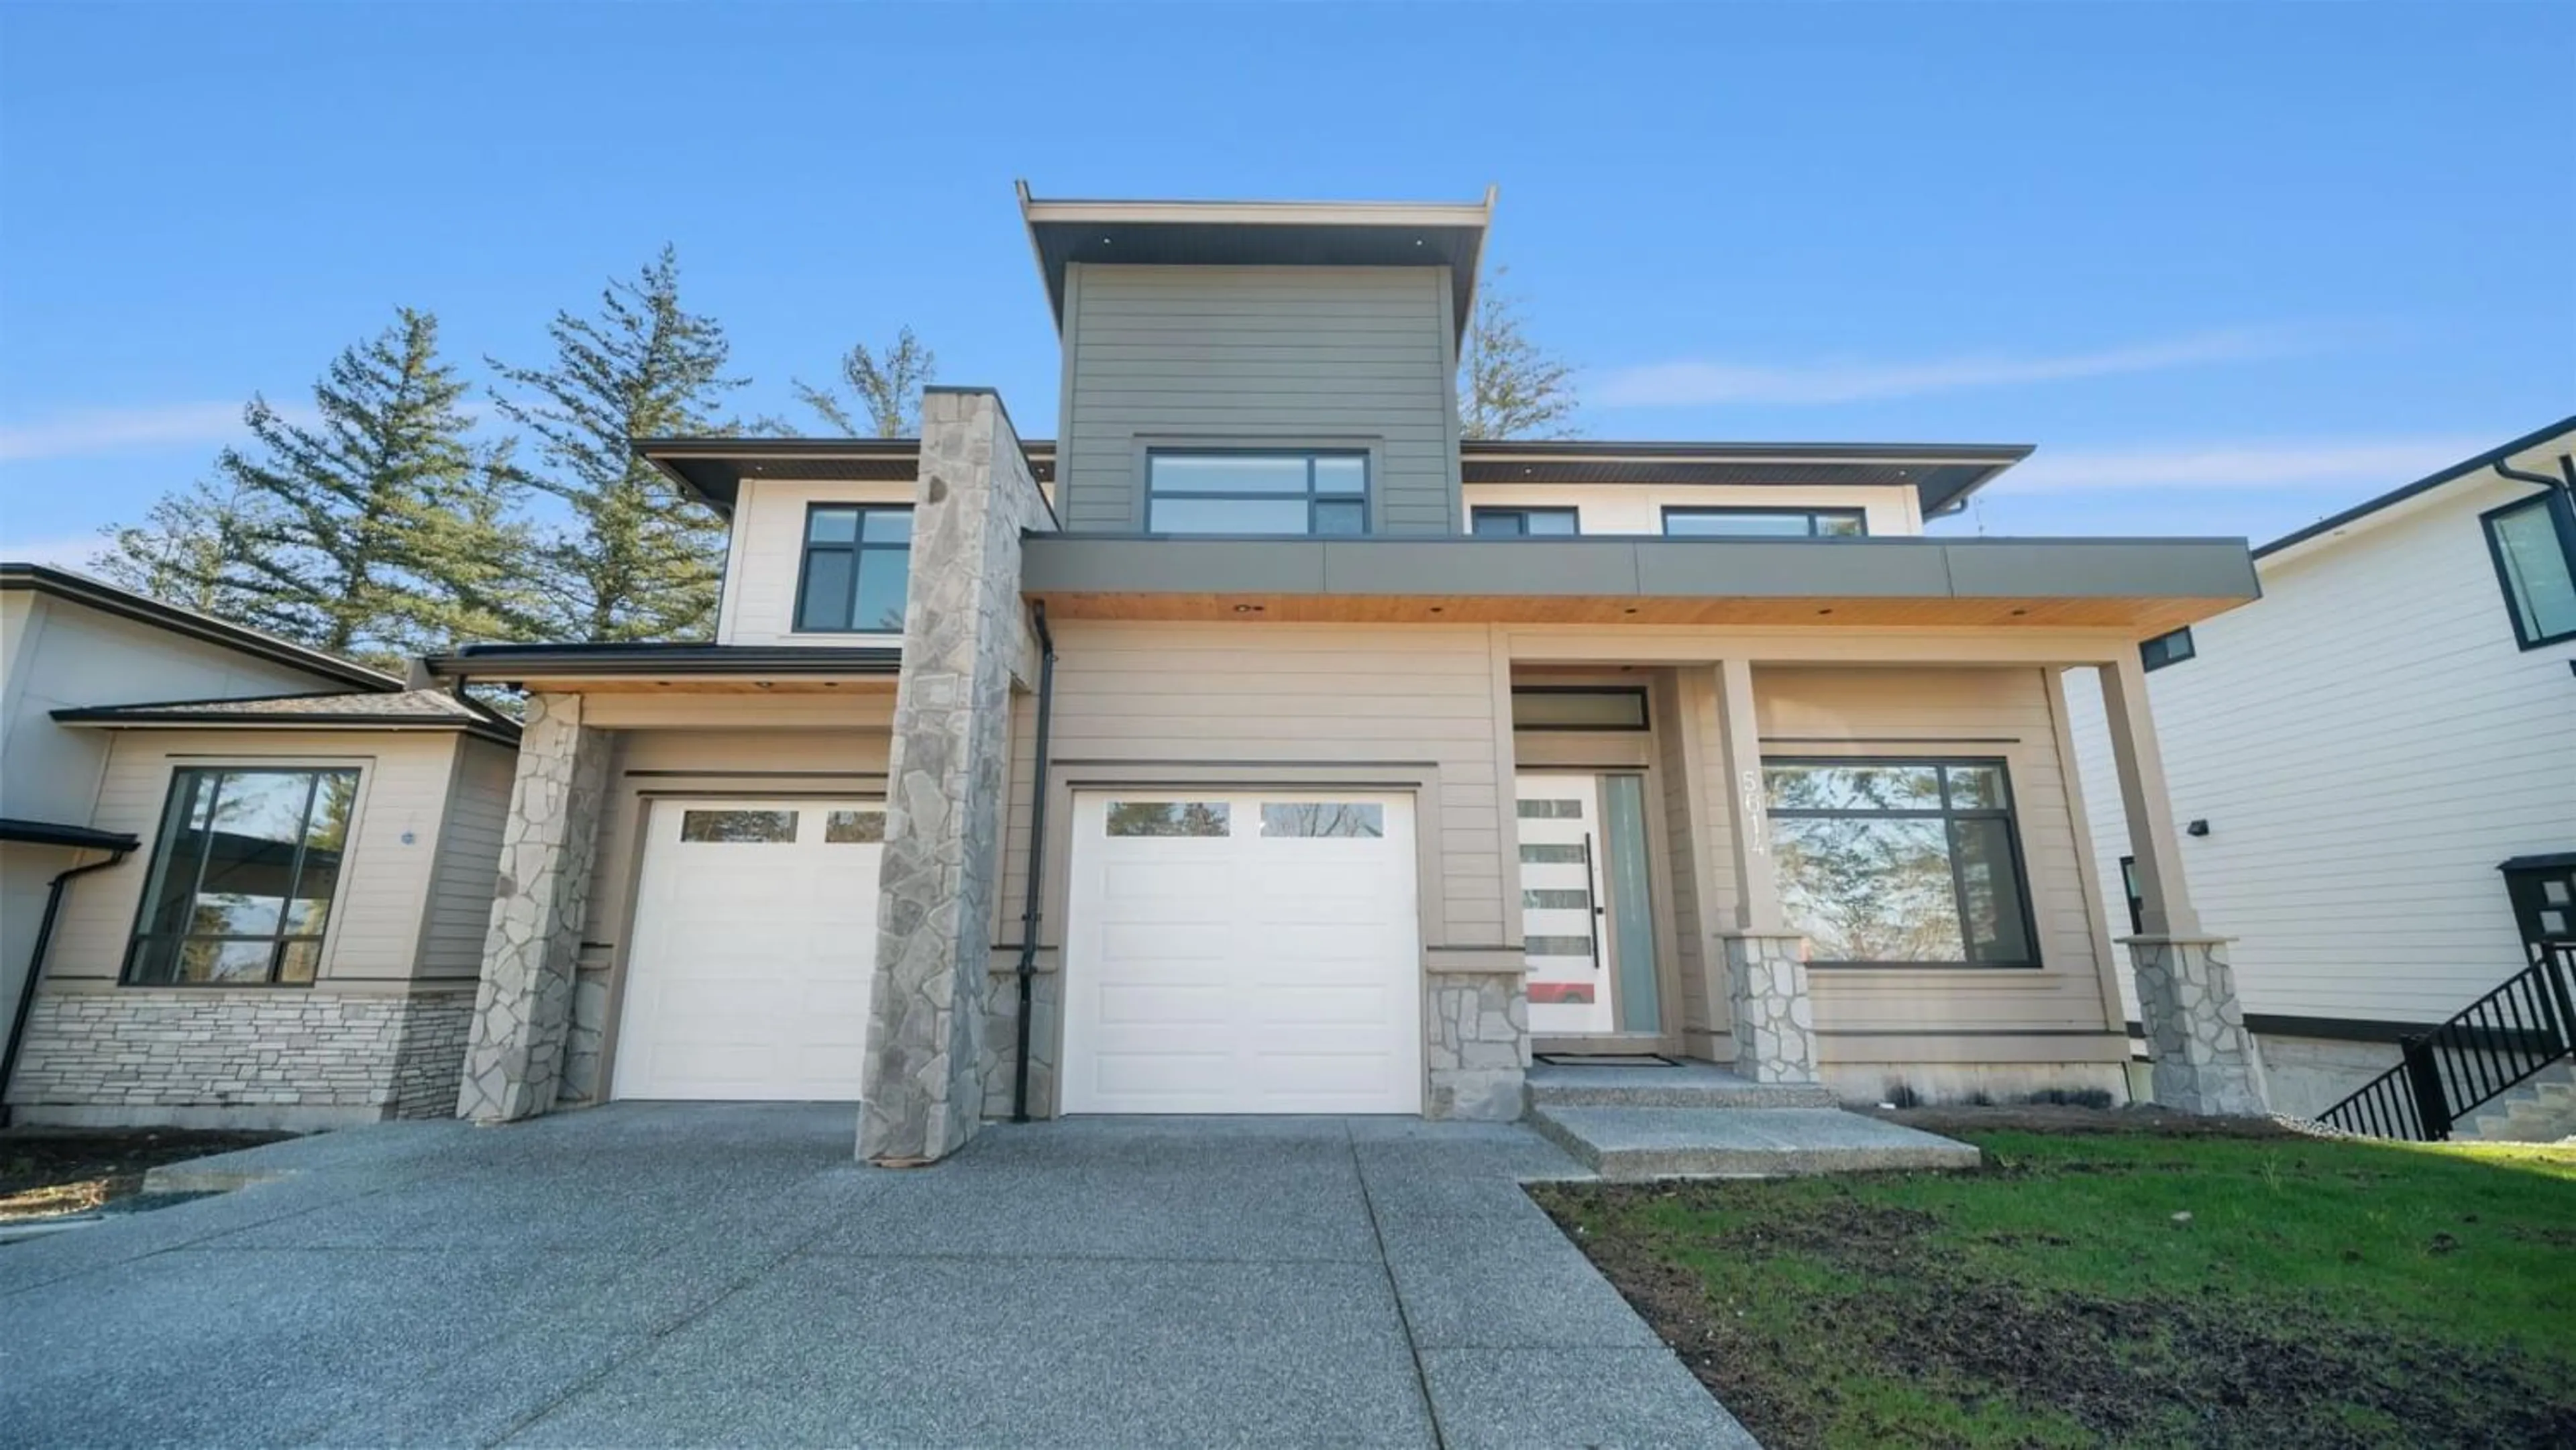 A pic from exterior of the house or condo for 5614 CRIMSON RIDGE, Chilliwack British Columbia V2R6H7